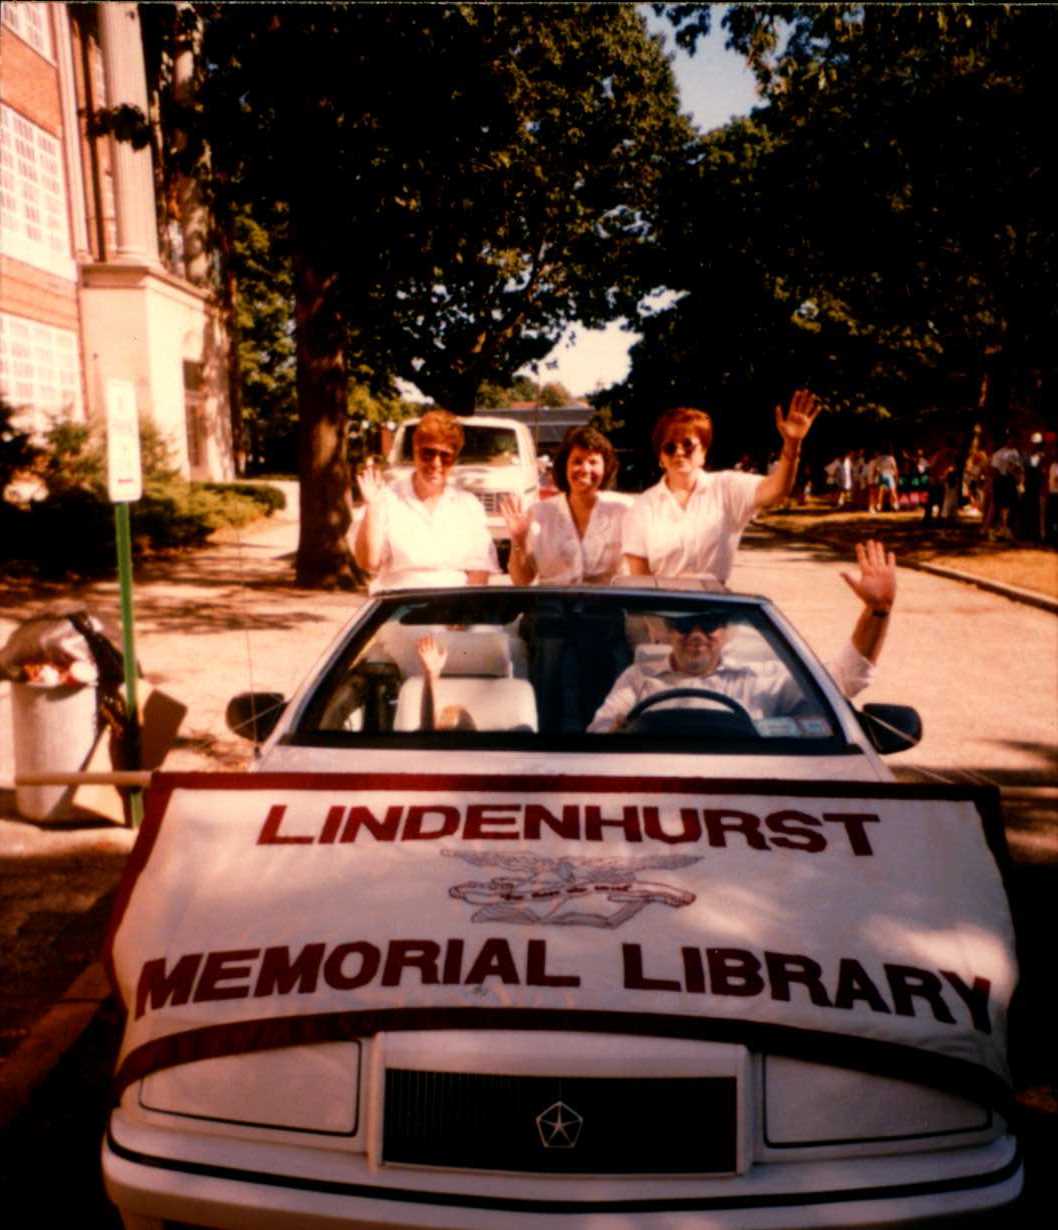 Lindenhurst Memorial Library on parade in a white convertable. 